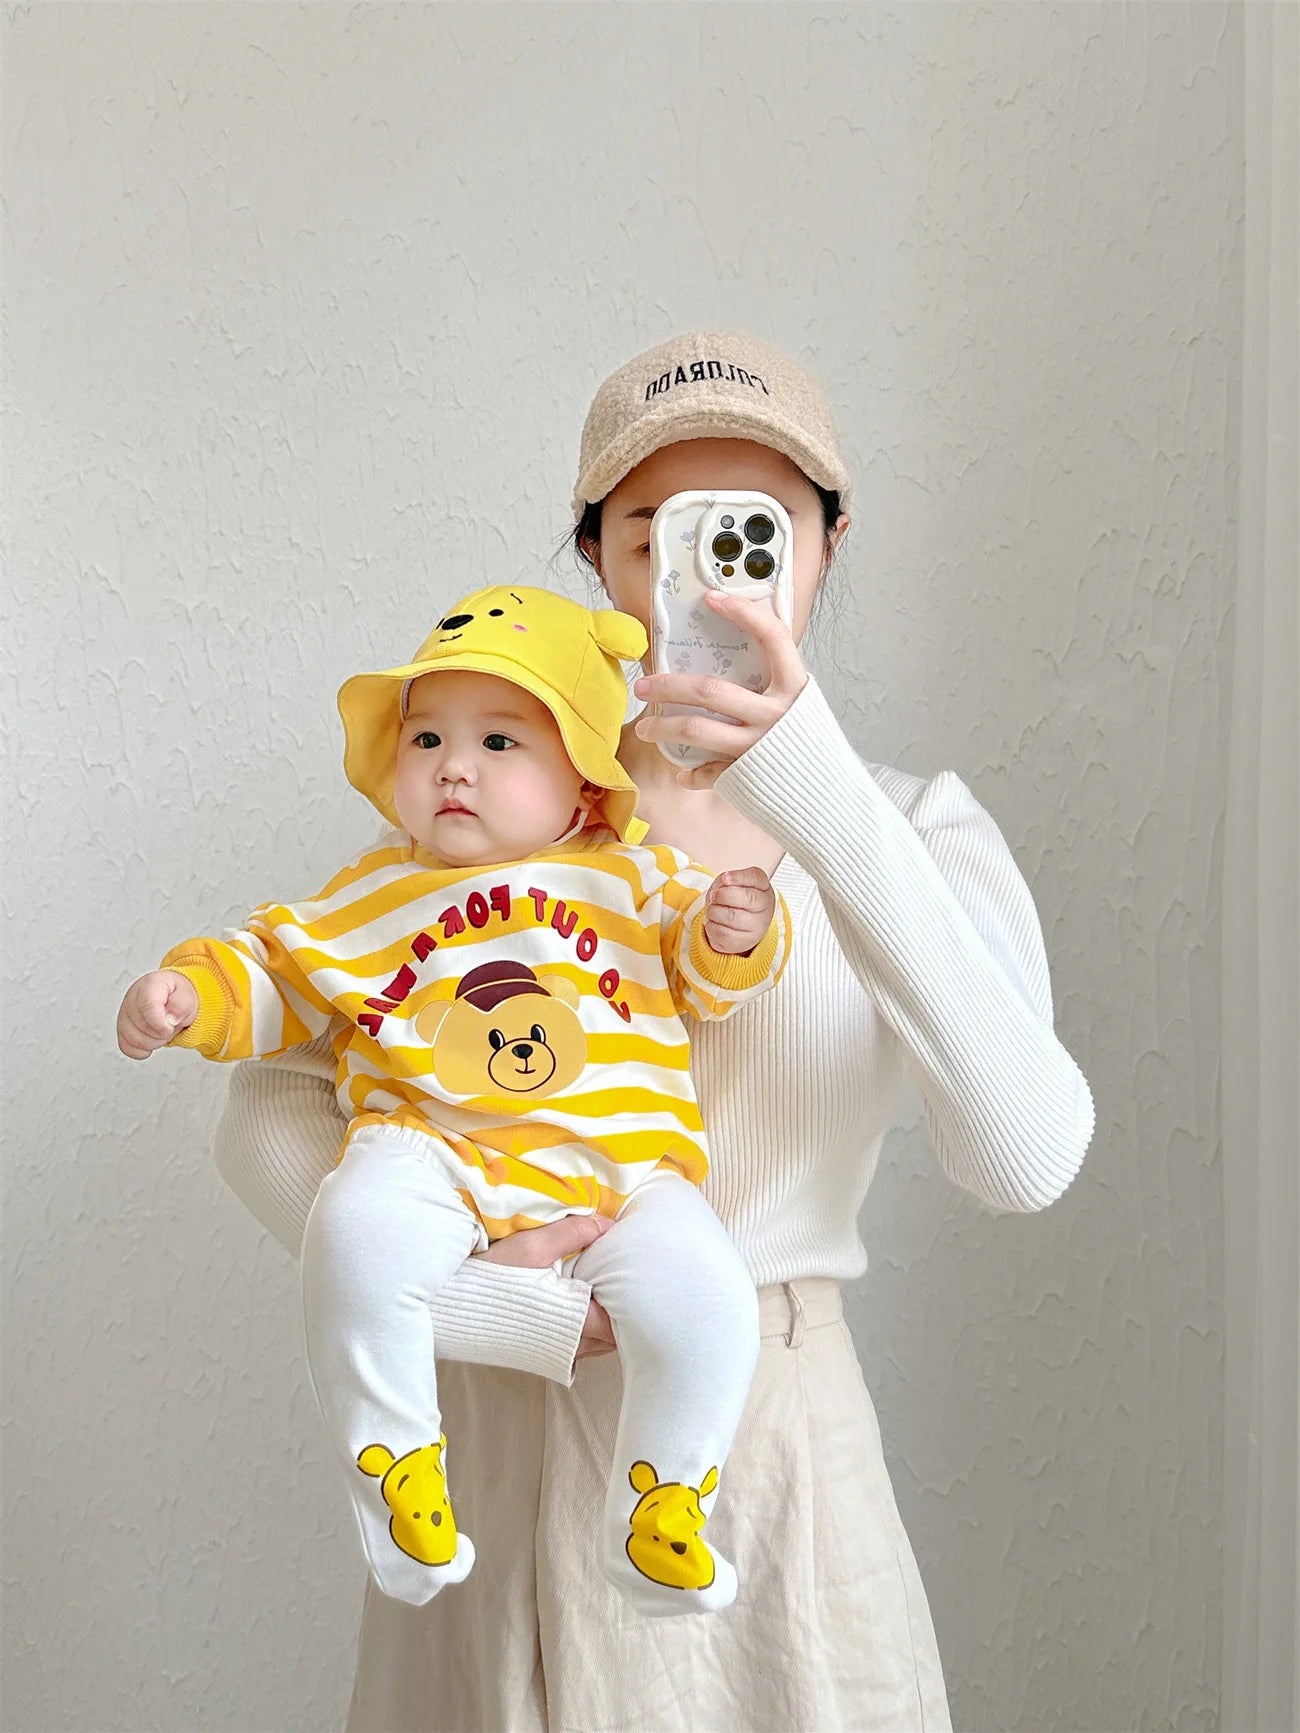 Baby's 100% Cotton Yellow Striped Bodysuit Outfit